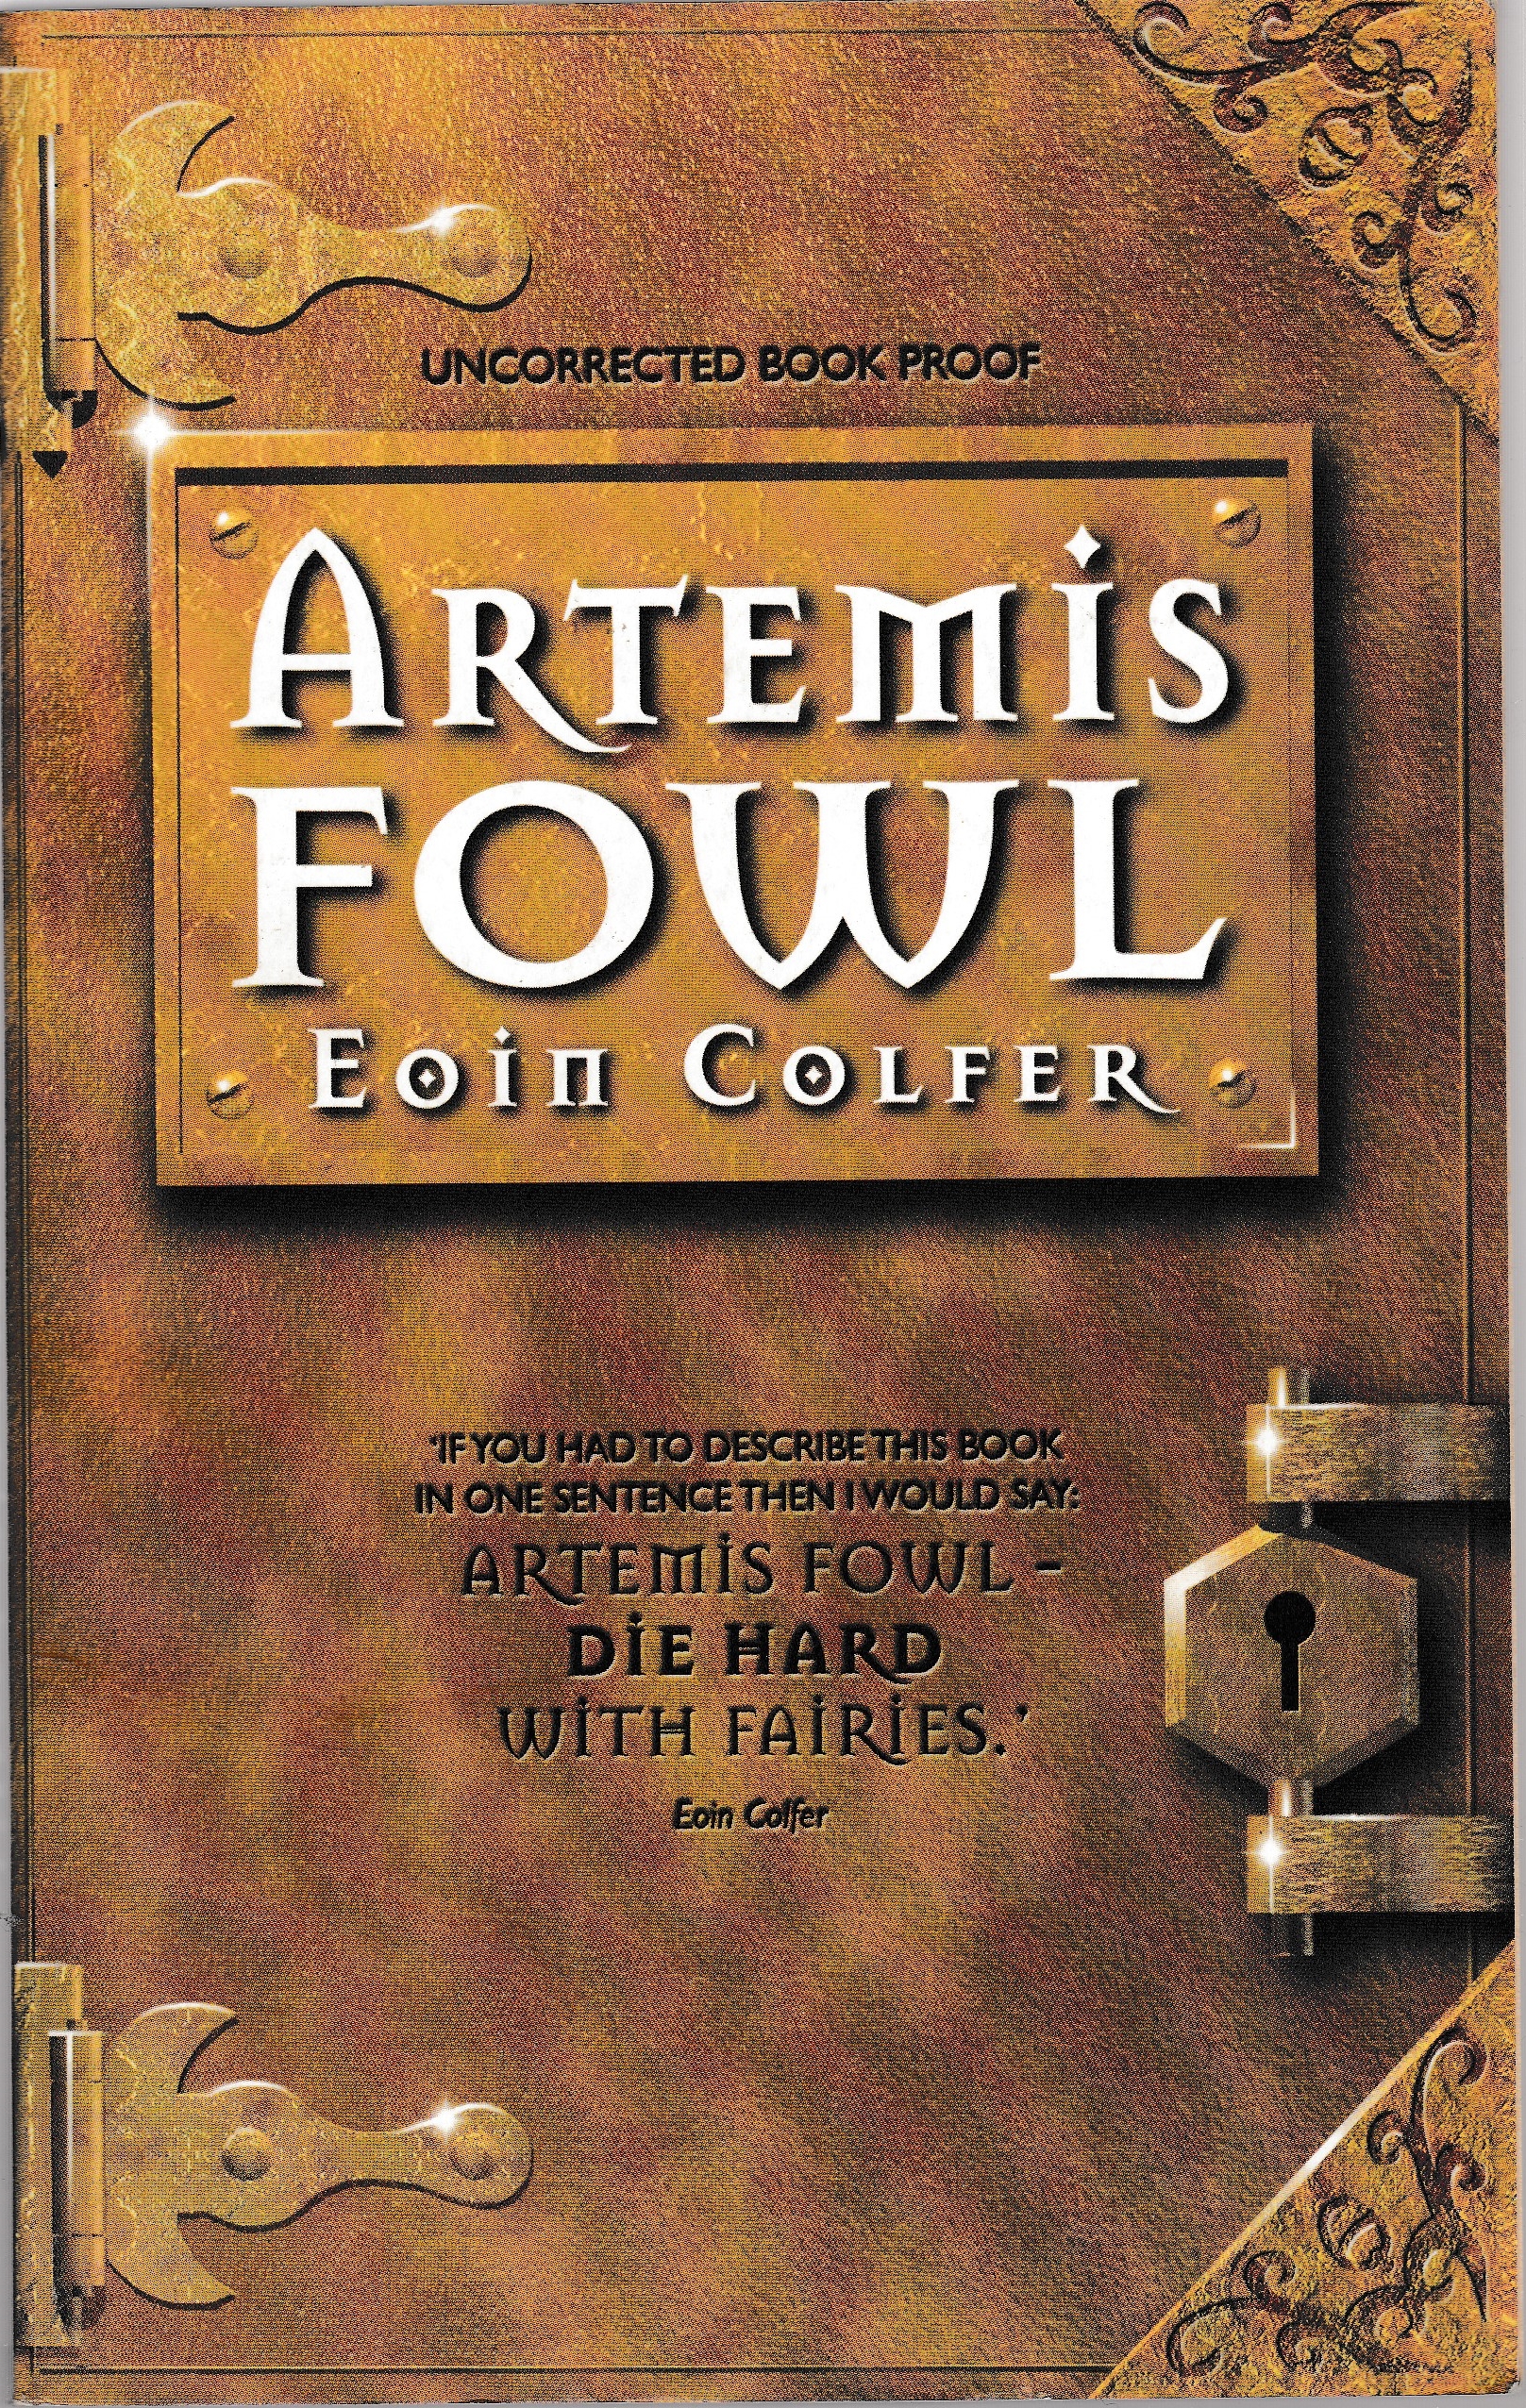 Artemis Fowl by Eoin Colfer: Very Good (2001) Signed by Author(s)